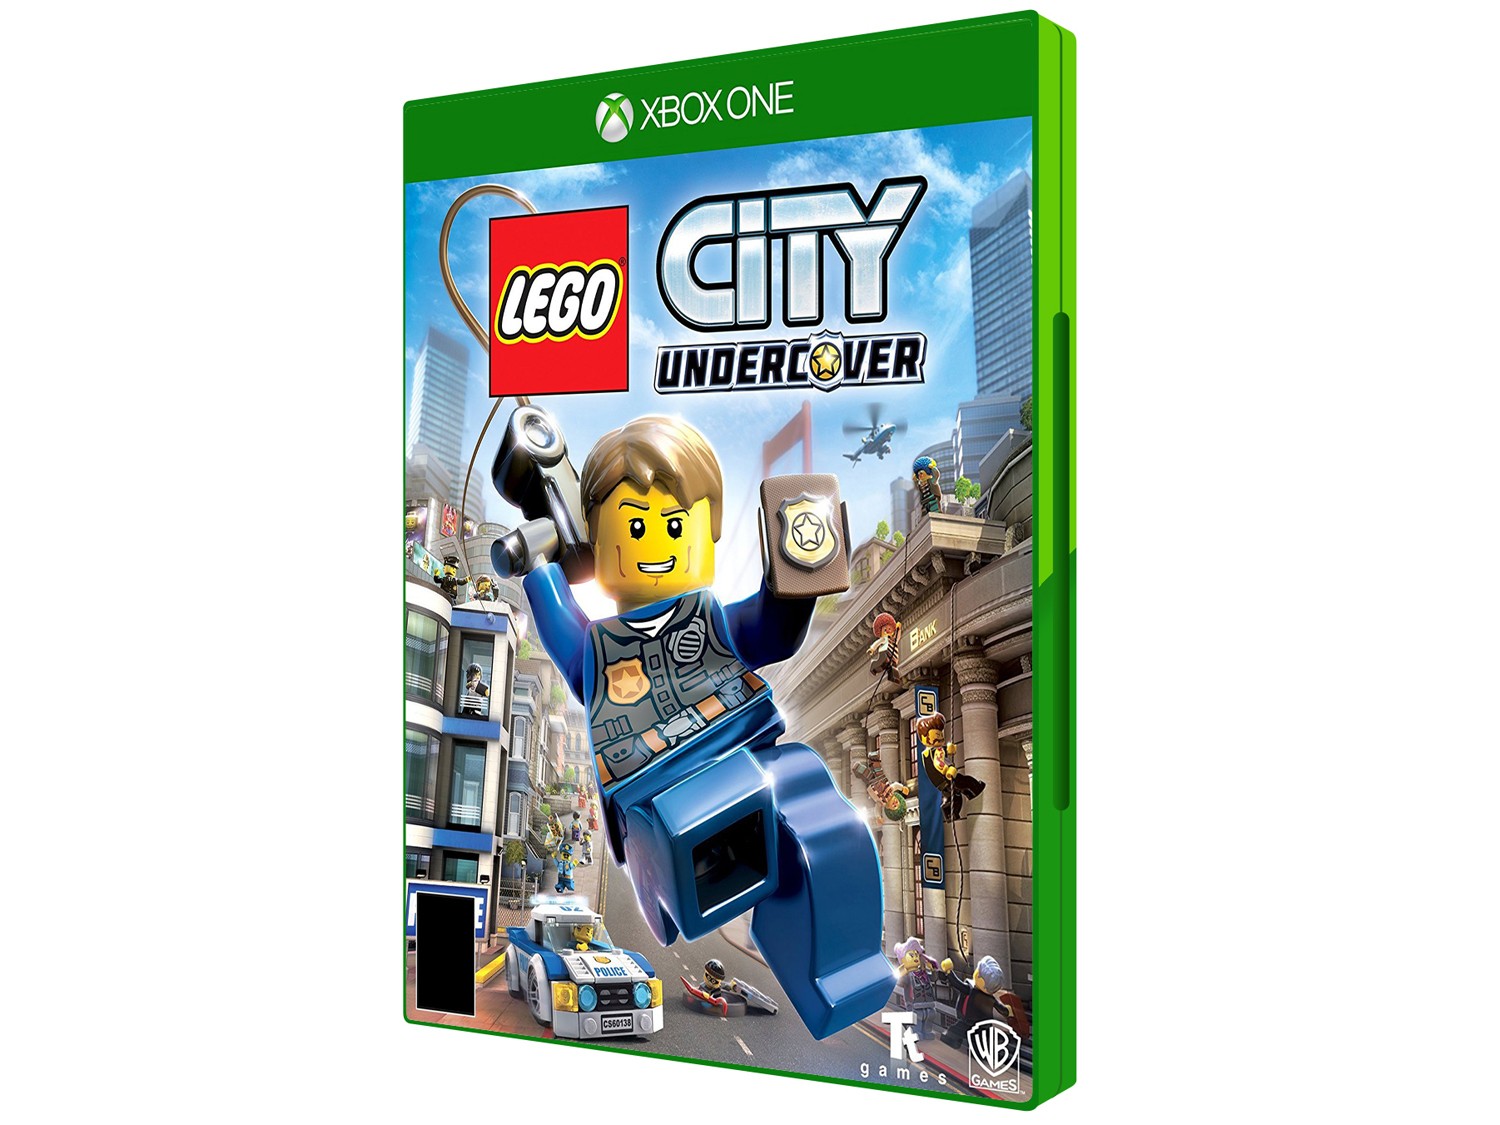 Buy LEGO CITY Undercover(XBOX ONE)🎮👻 and download